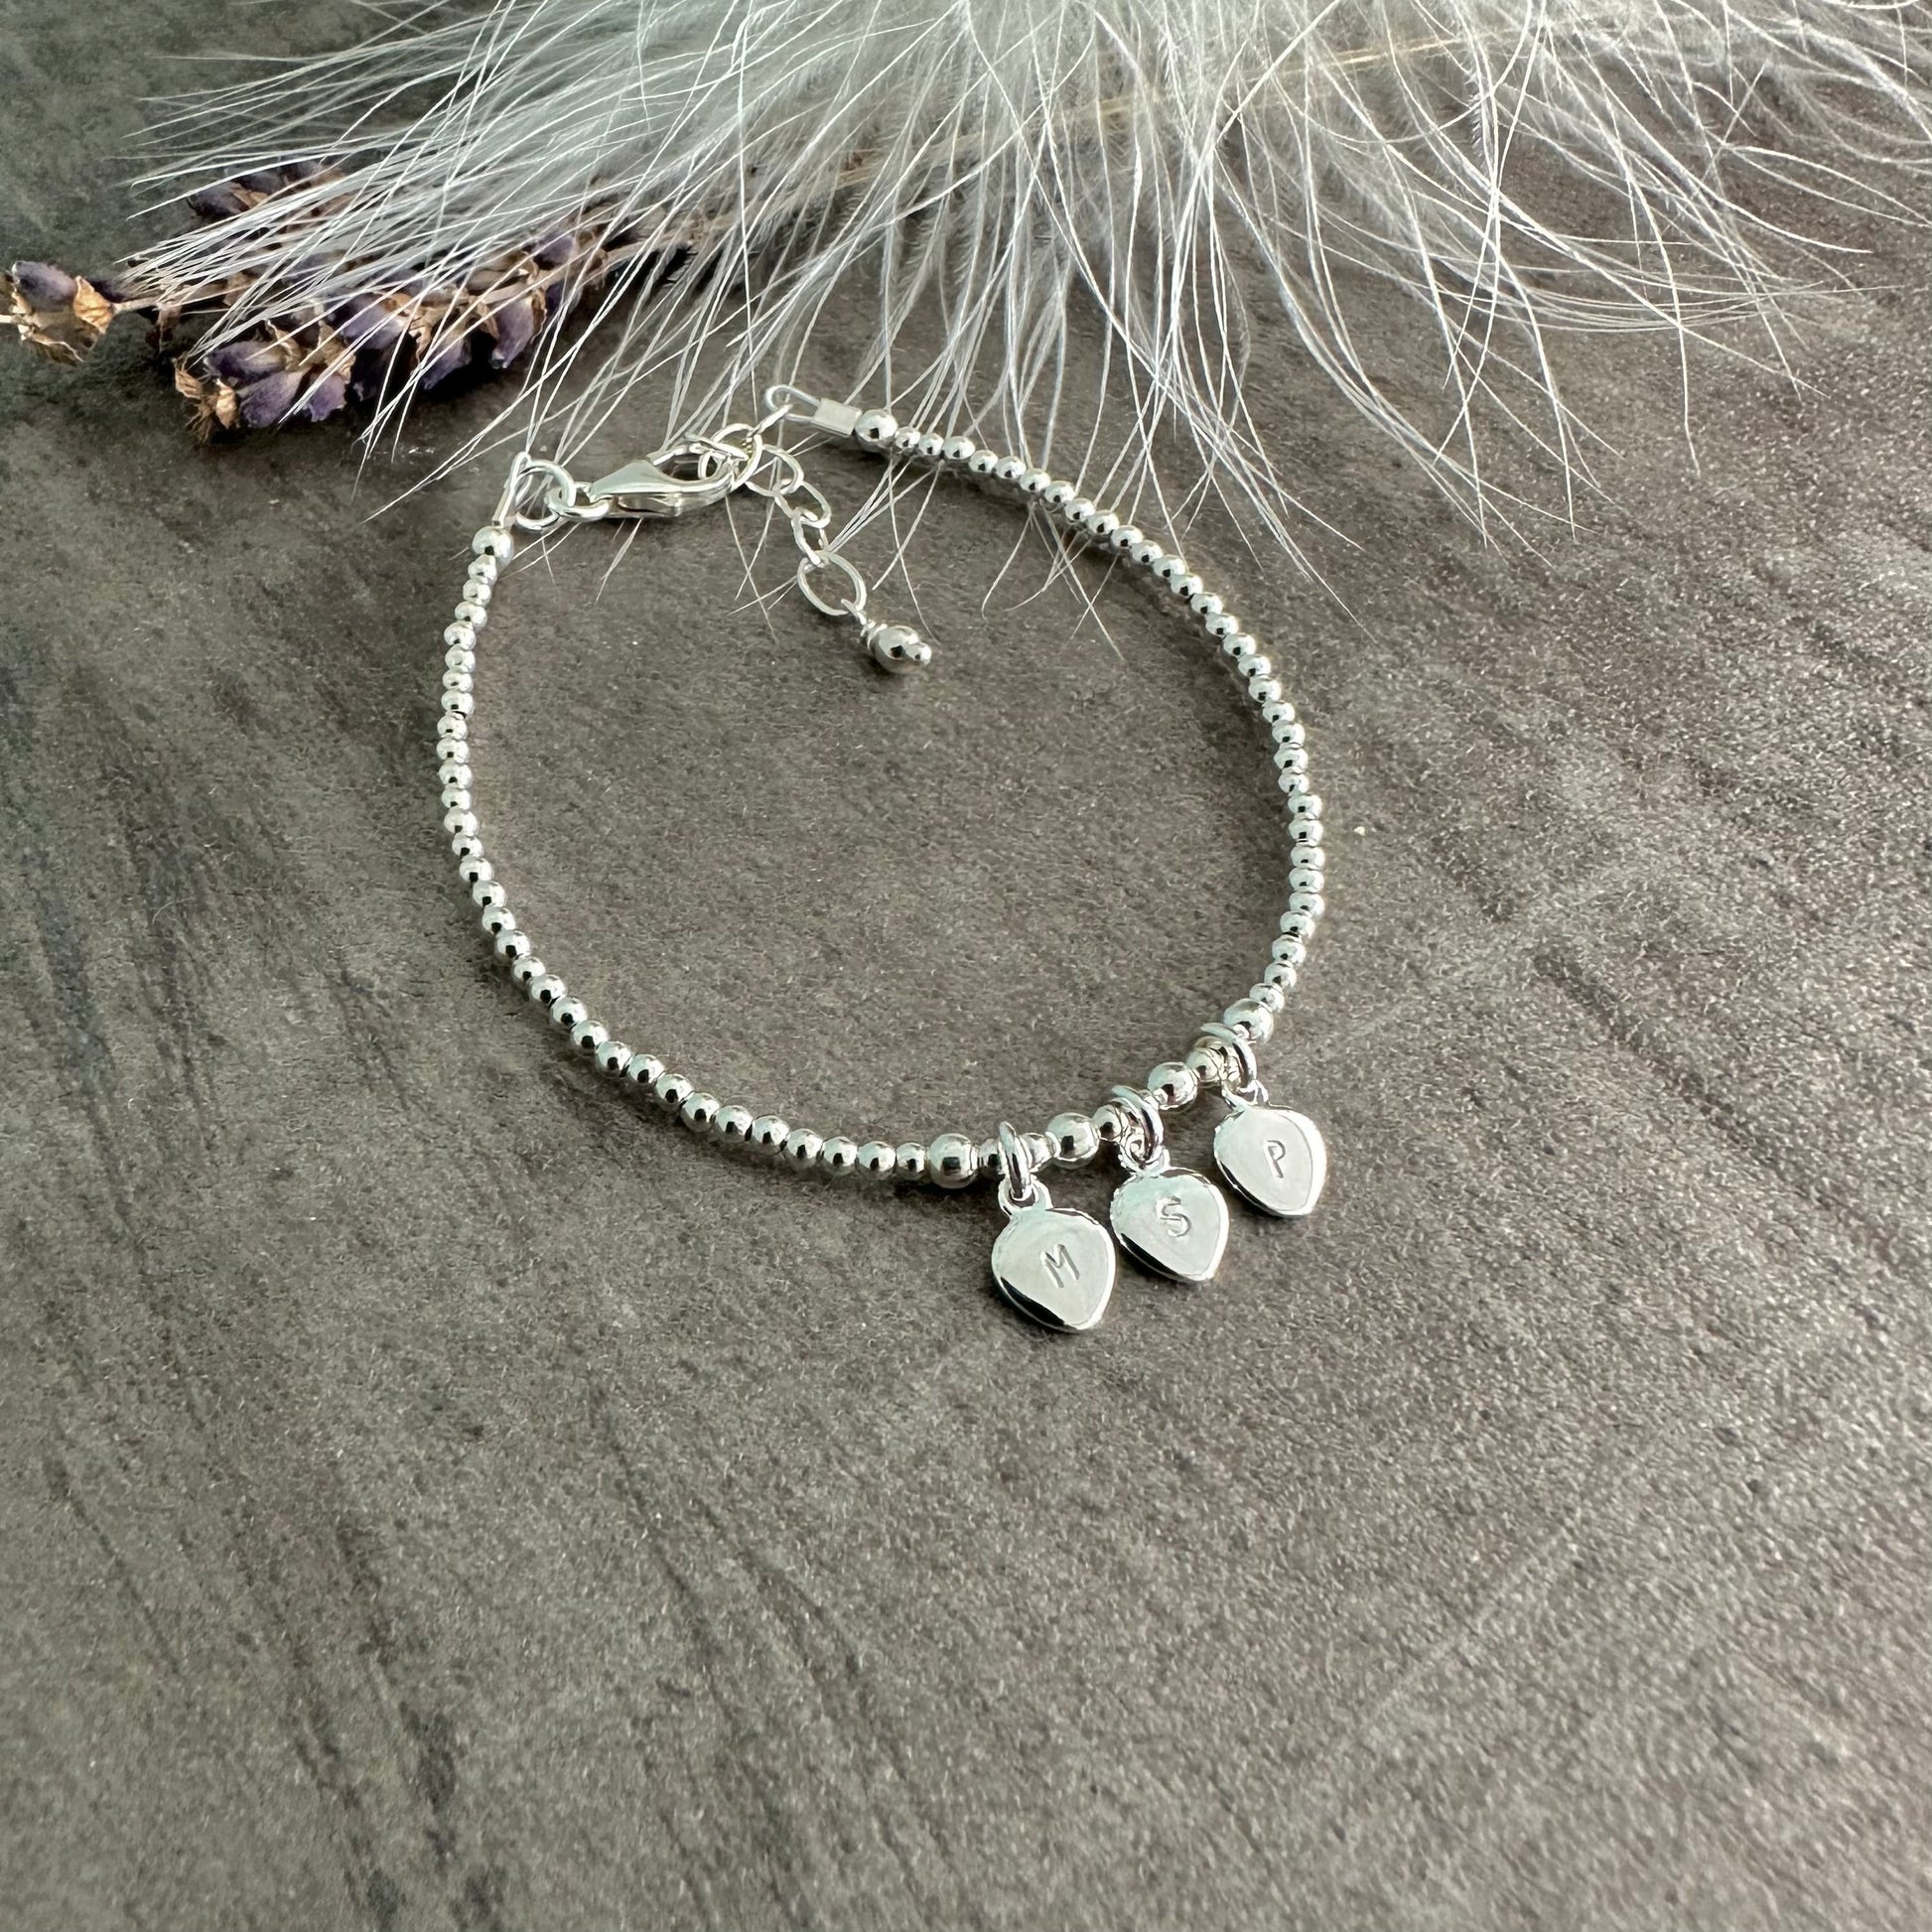 Mothers Day Gift for Sister Friend Family Initial Bracelet in Sterling Silver